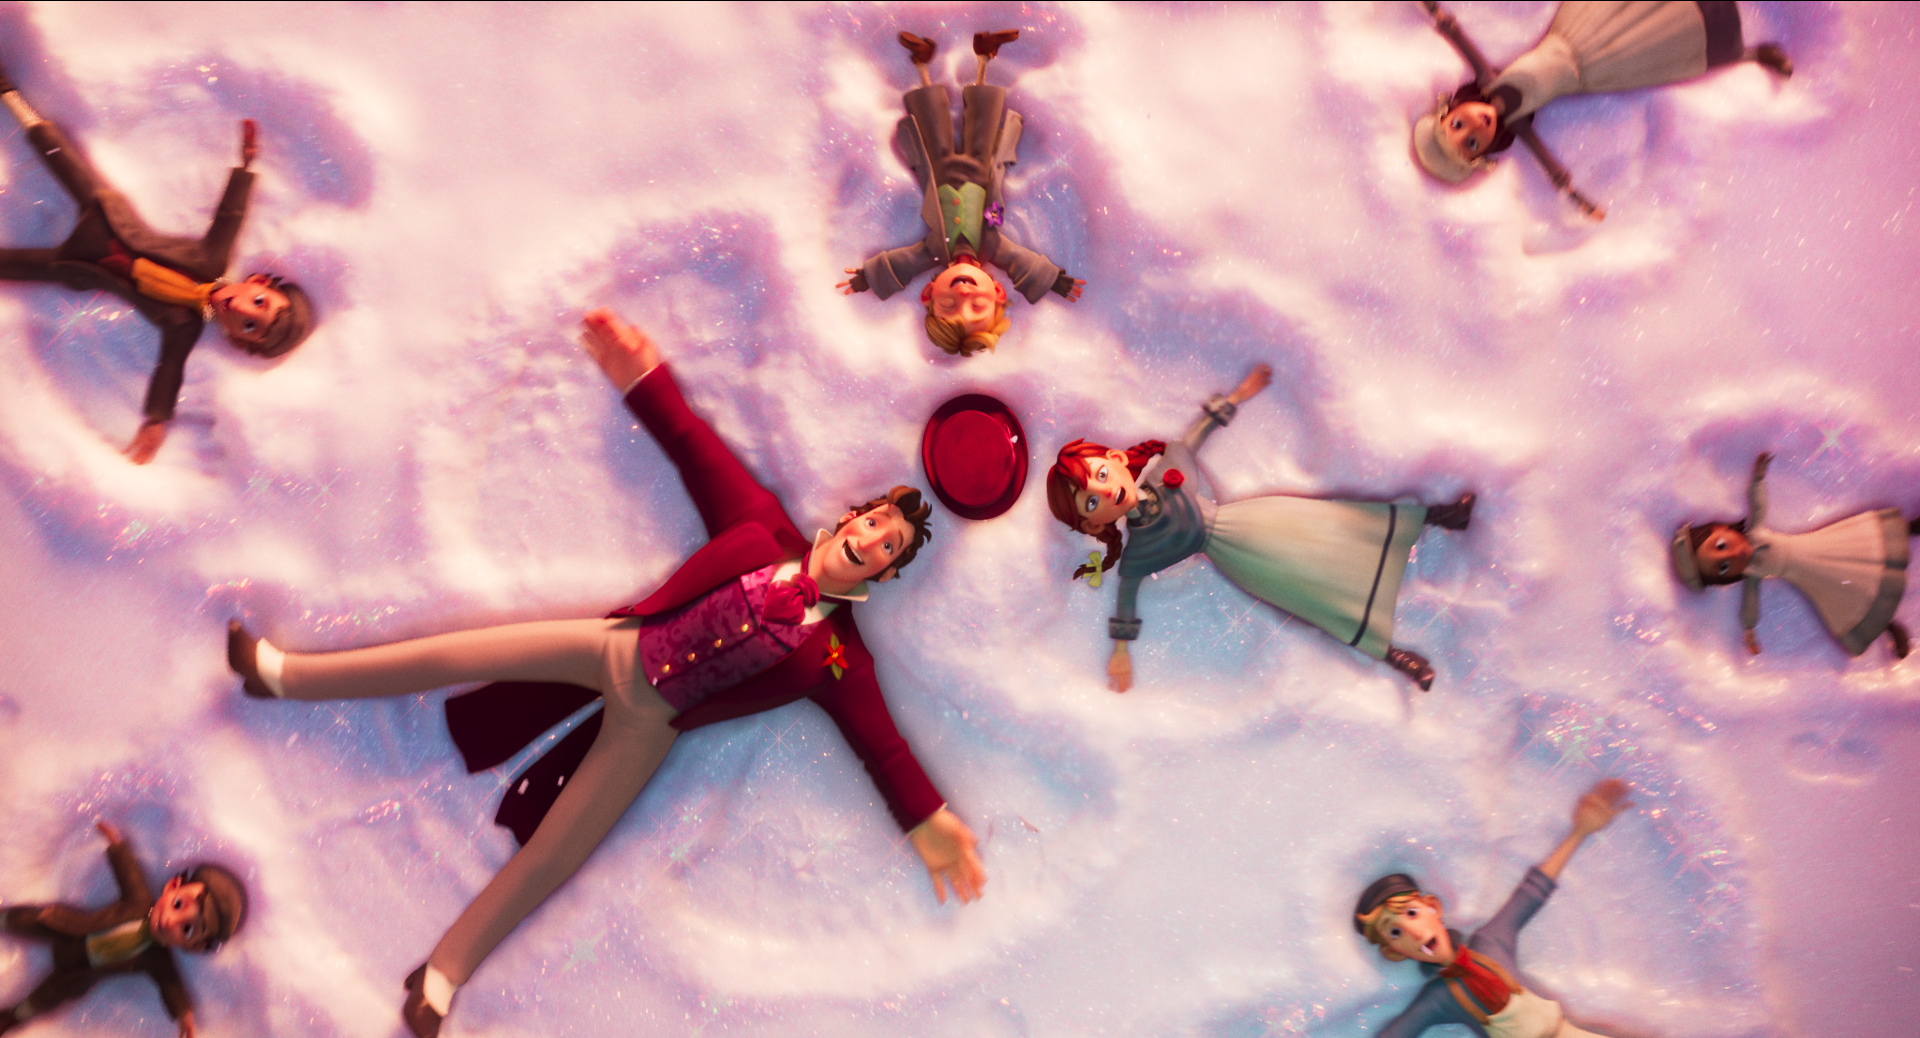 Animated characters making snow angels in a snowy forrest floor.